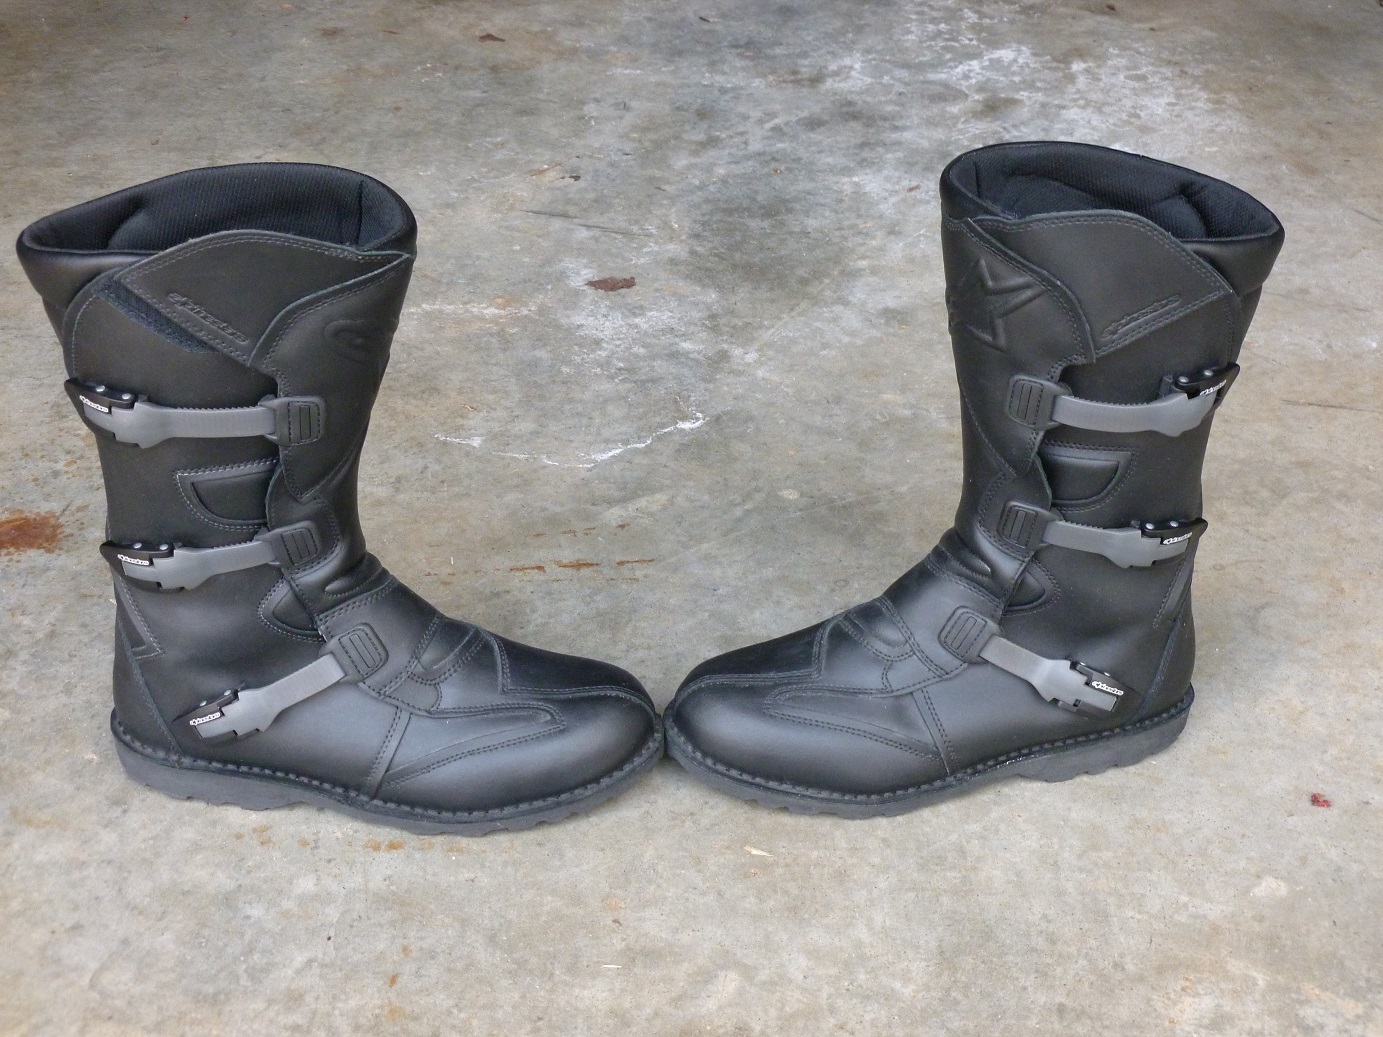 Viewing Images For Alpinestars Scout Waterproof Boots :: MotorcycleGear.com